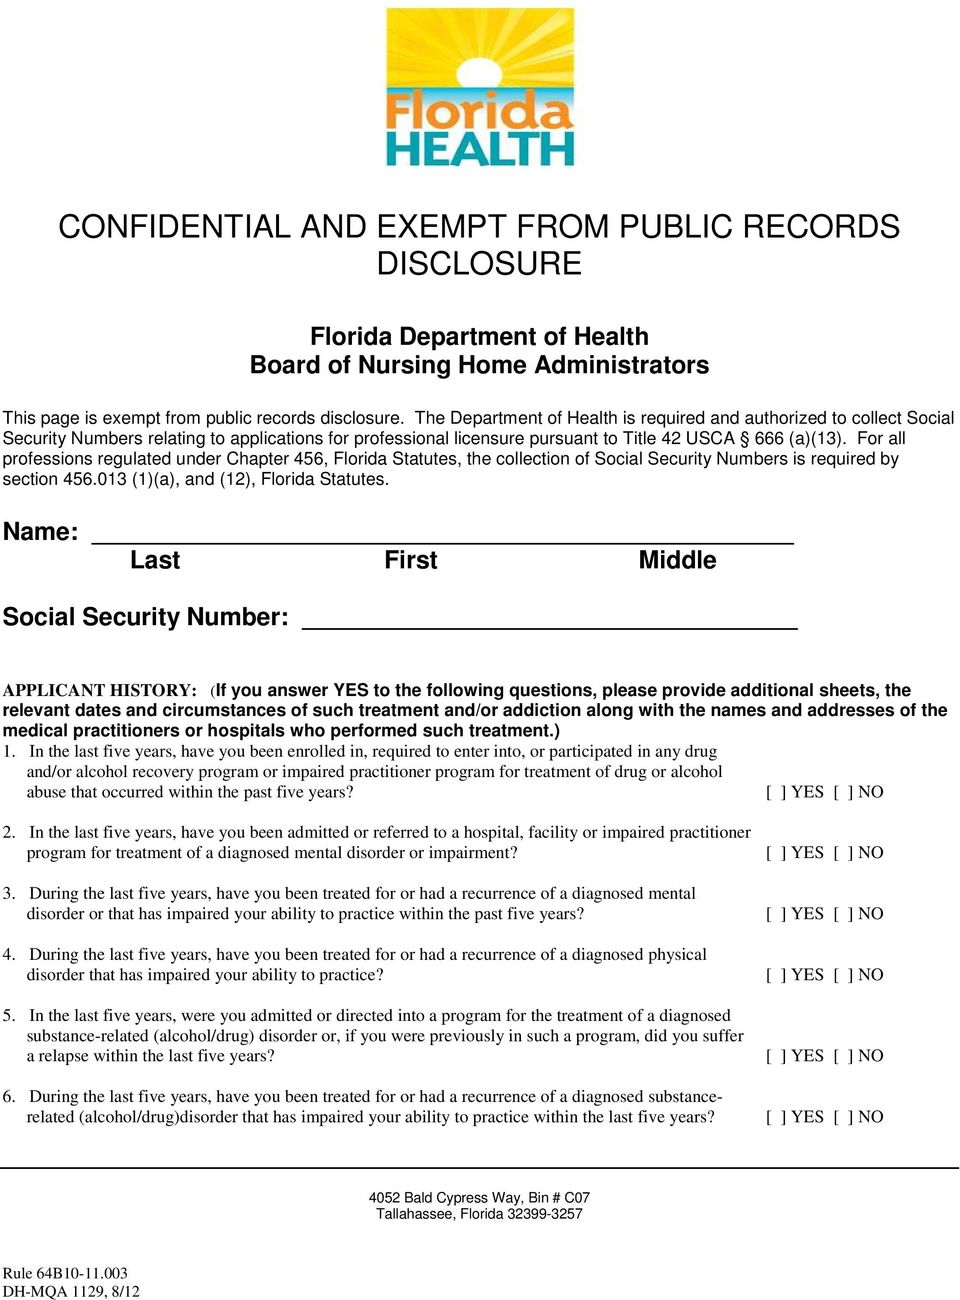 For all professions regulated under Chapter 456, Florida Statutes, the collection of Social Security Numbers is required by section 456.013 (1)(a), and (12), Florida Statutes.